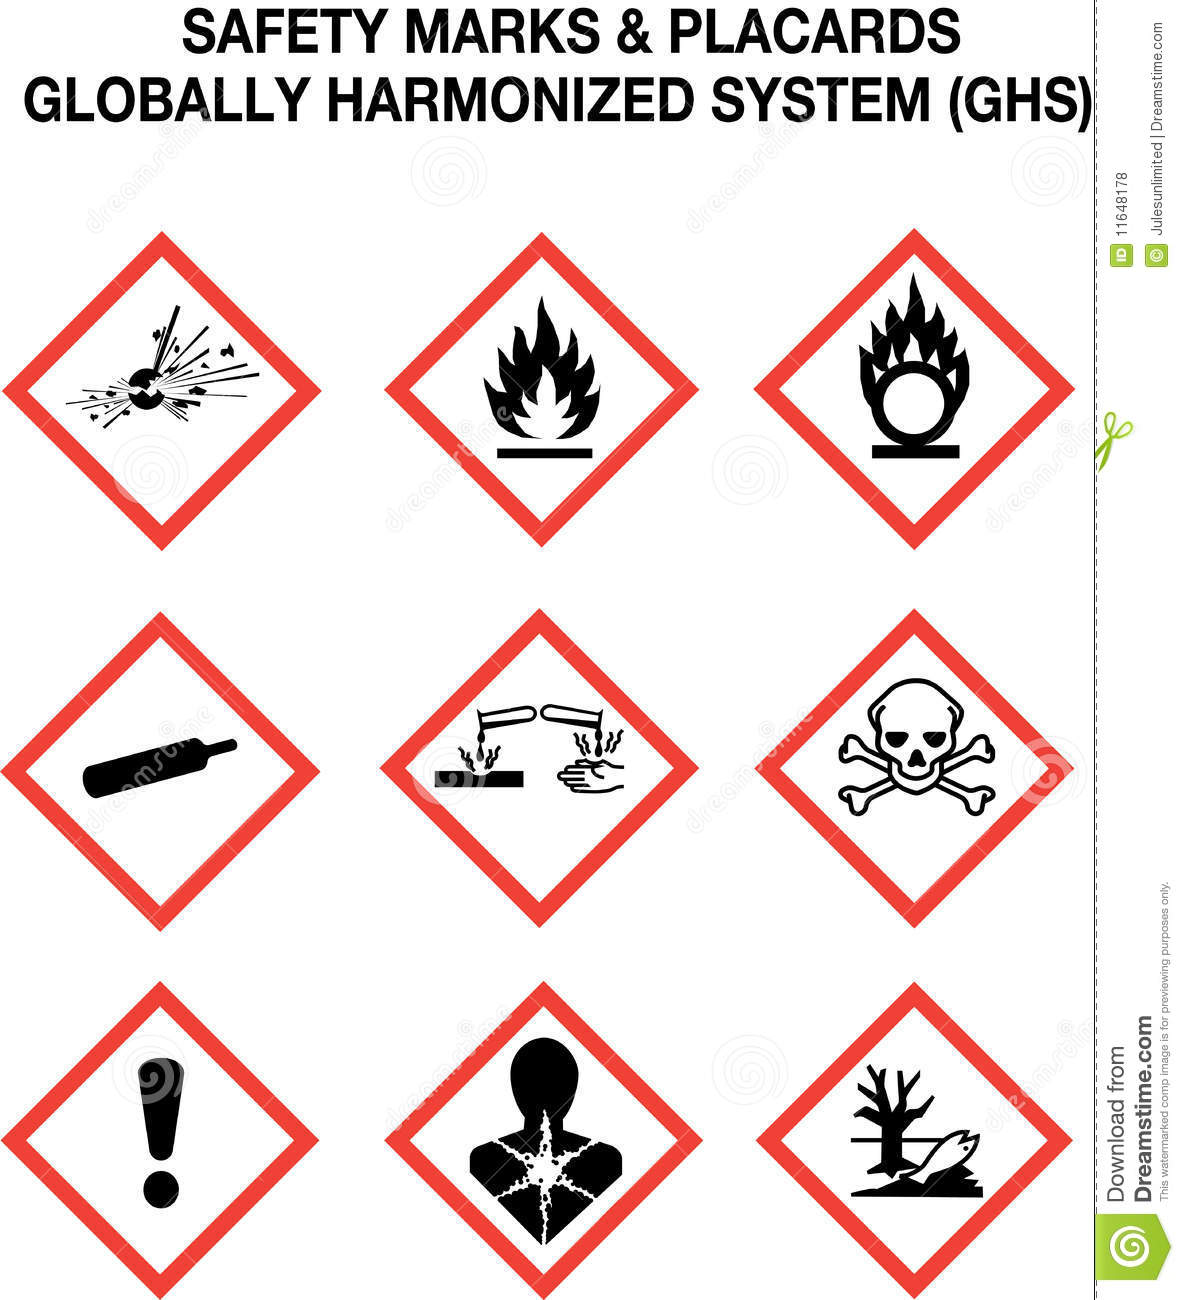 The 9 Warning Signs According To The Globally Harmonized System For